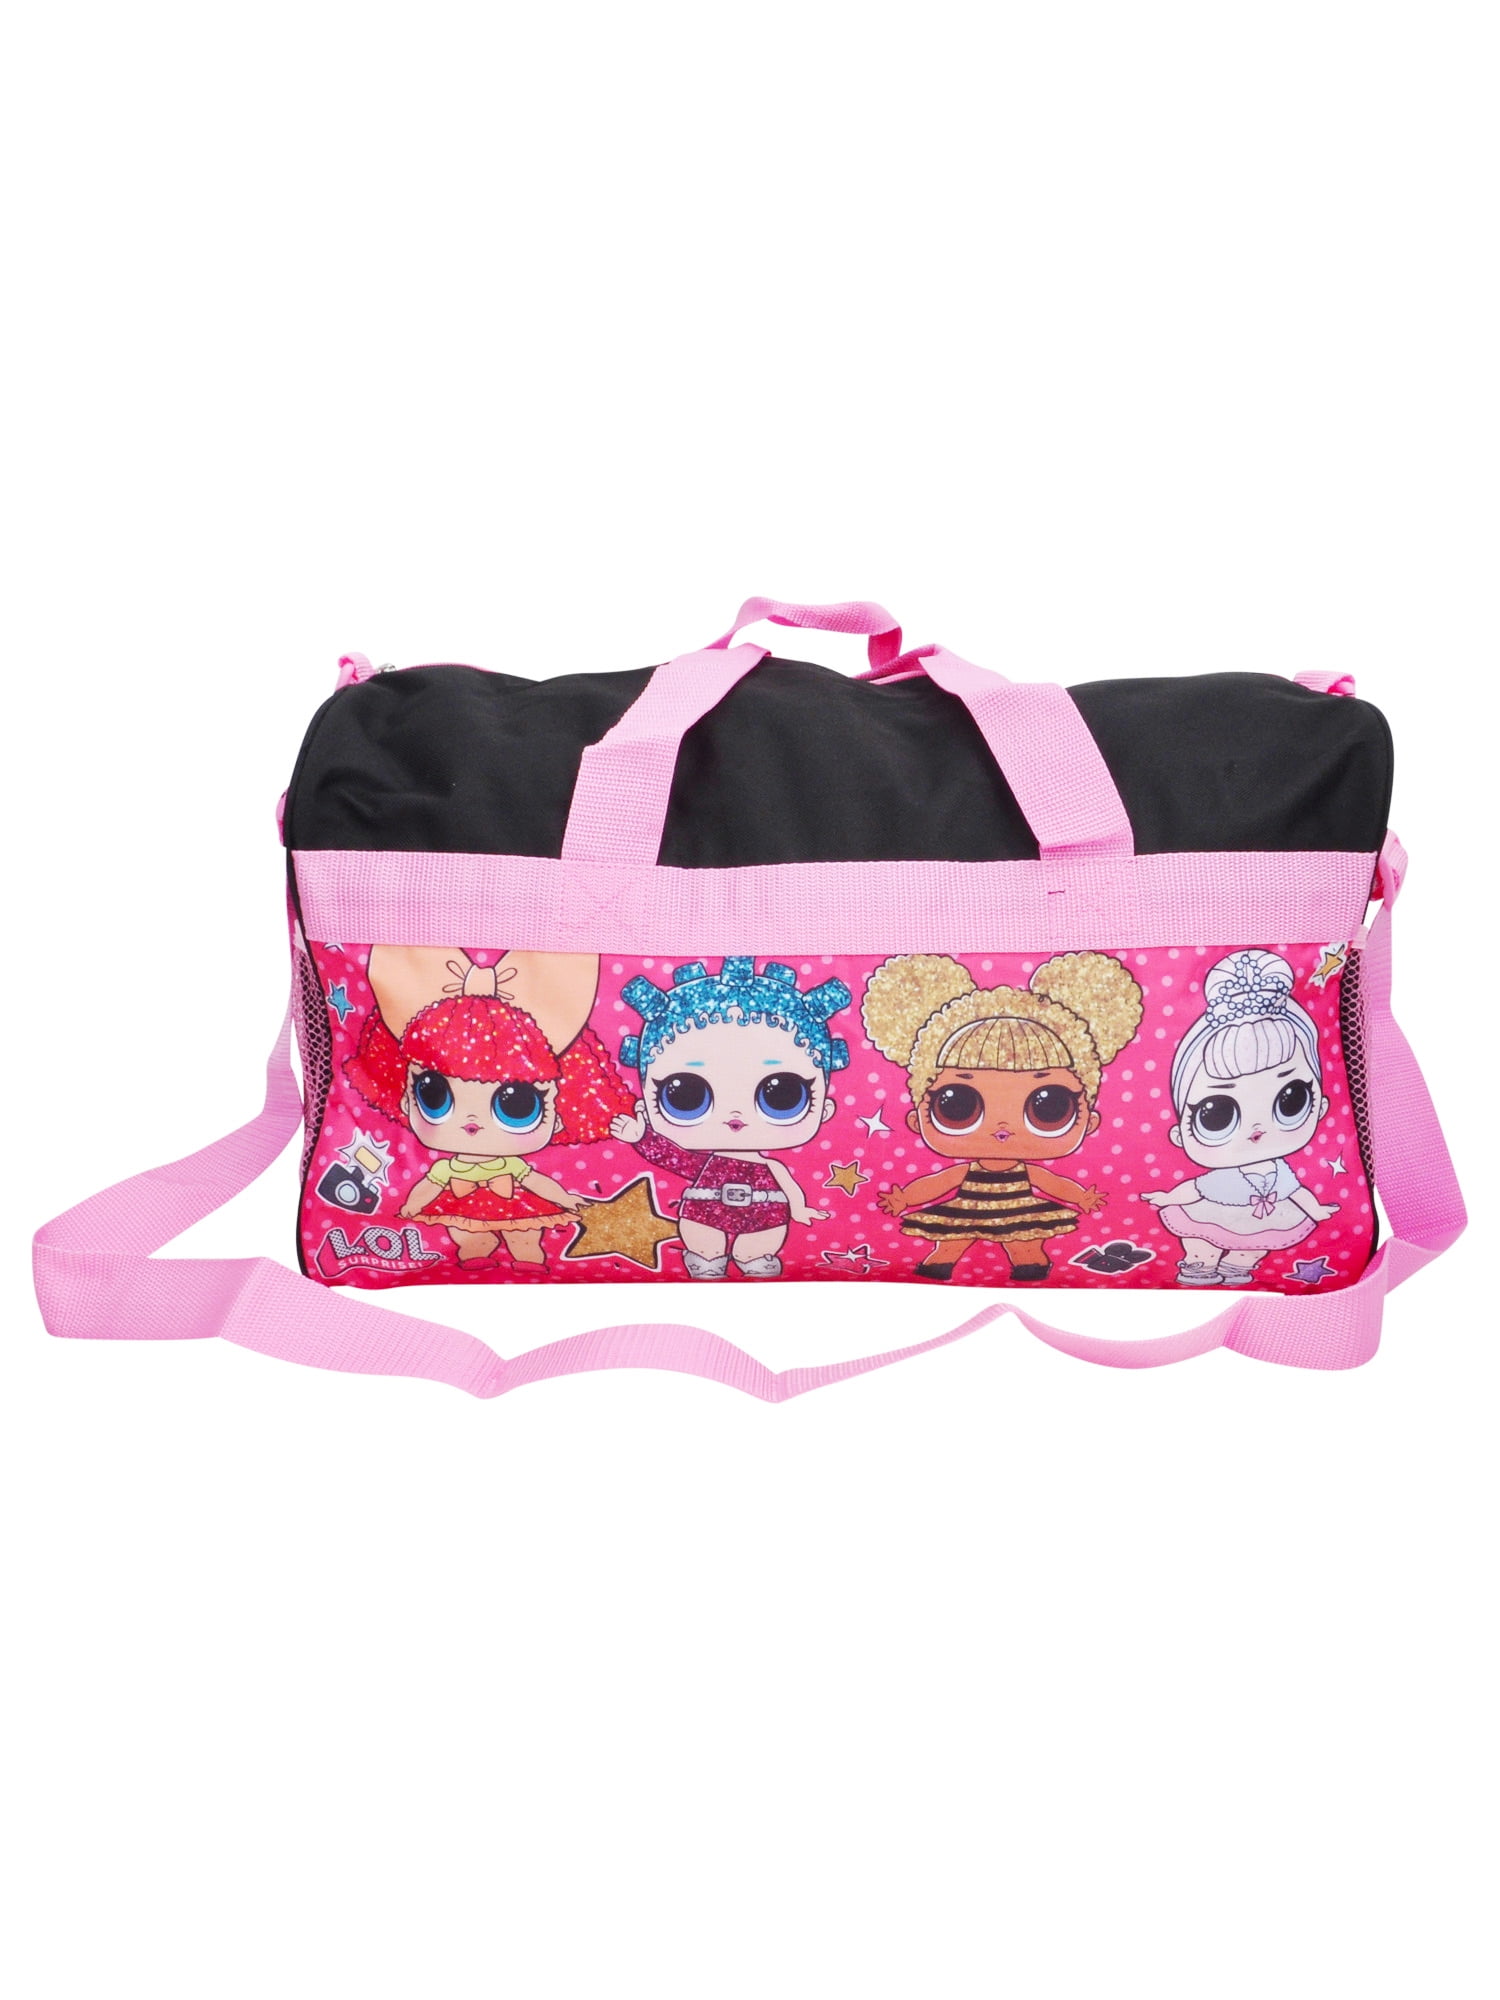 Girls 17x10 in. L.O.L Surprise Large Duffle Bag Sequins for Girls 